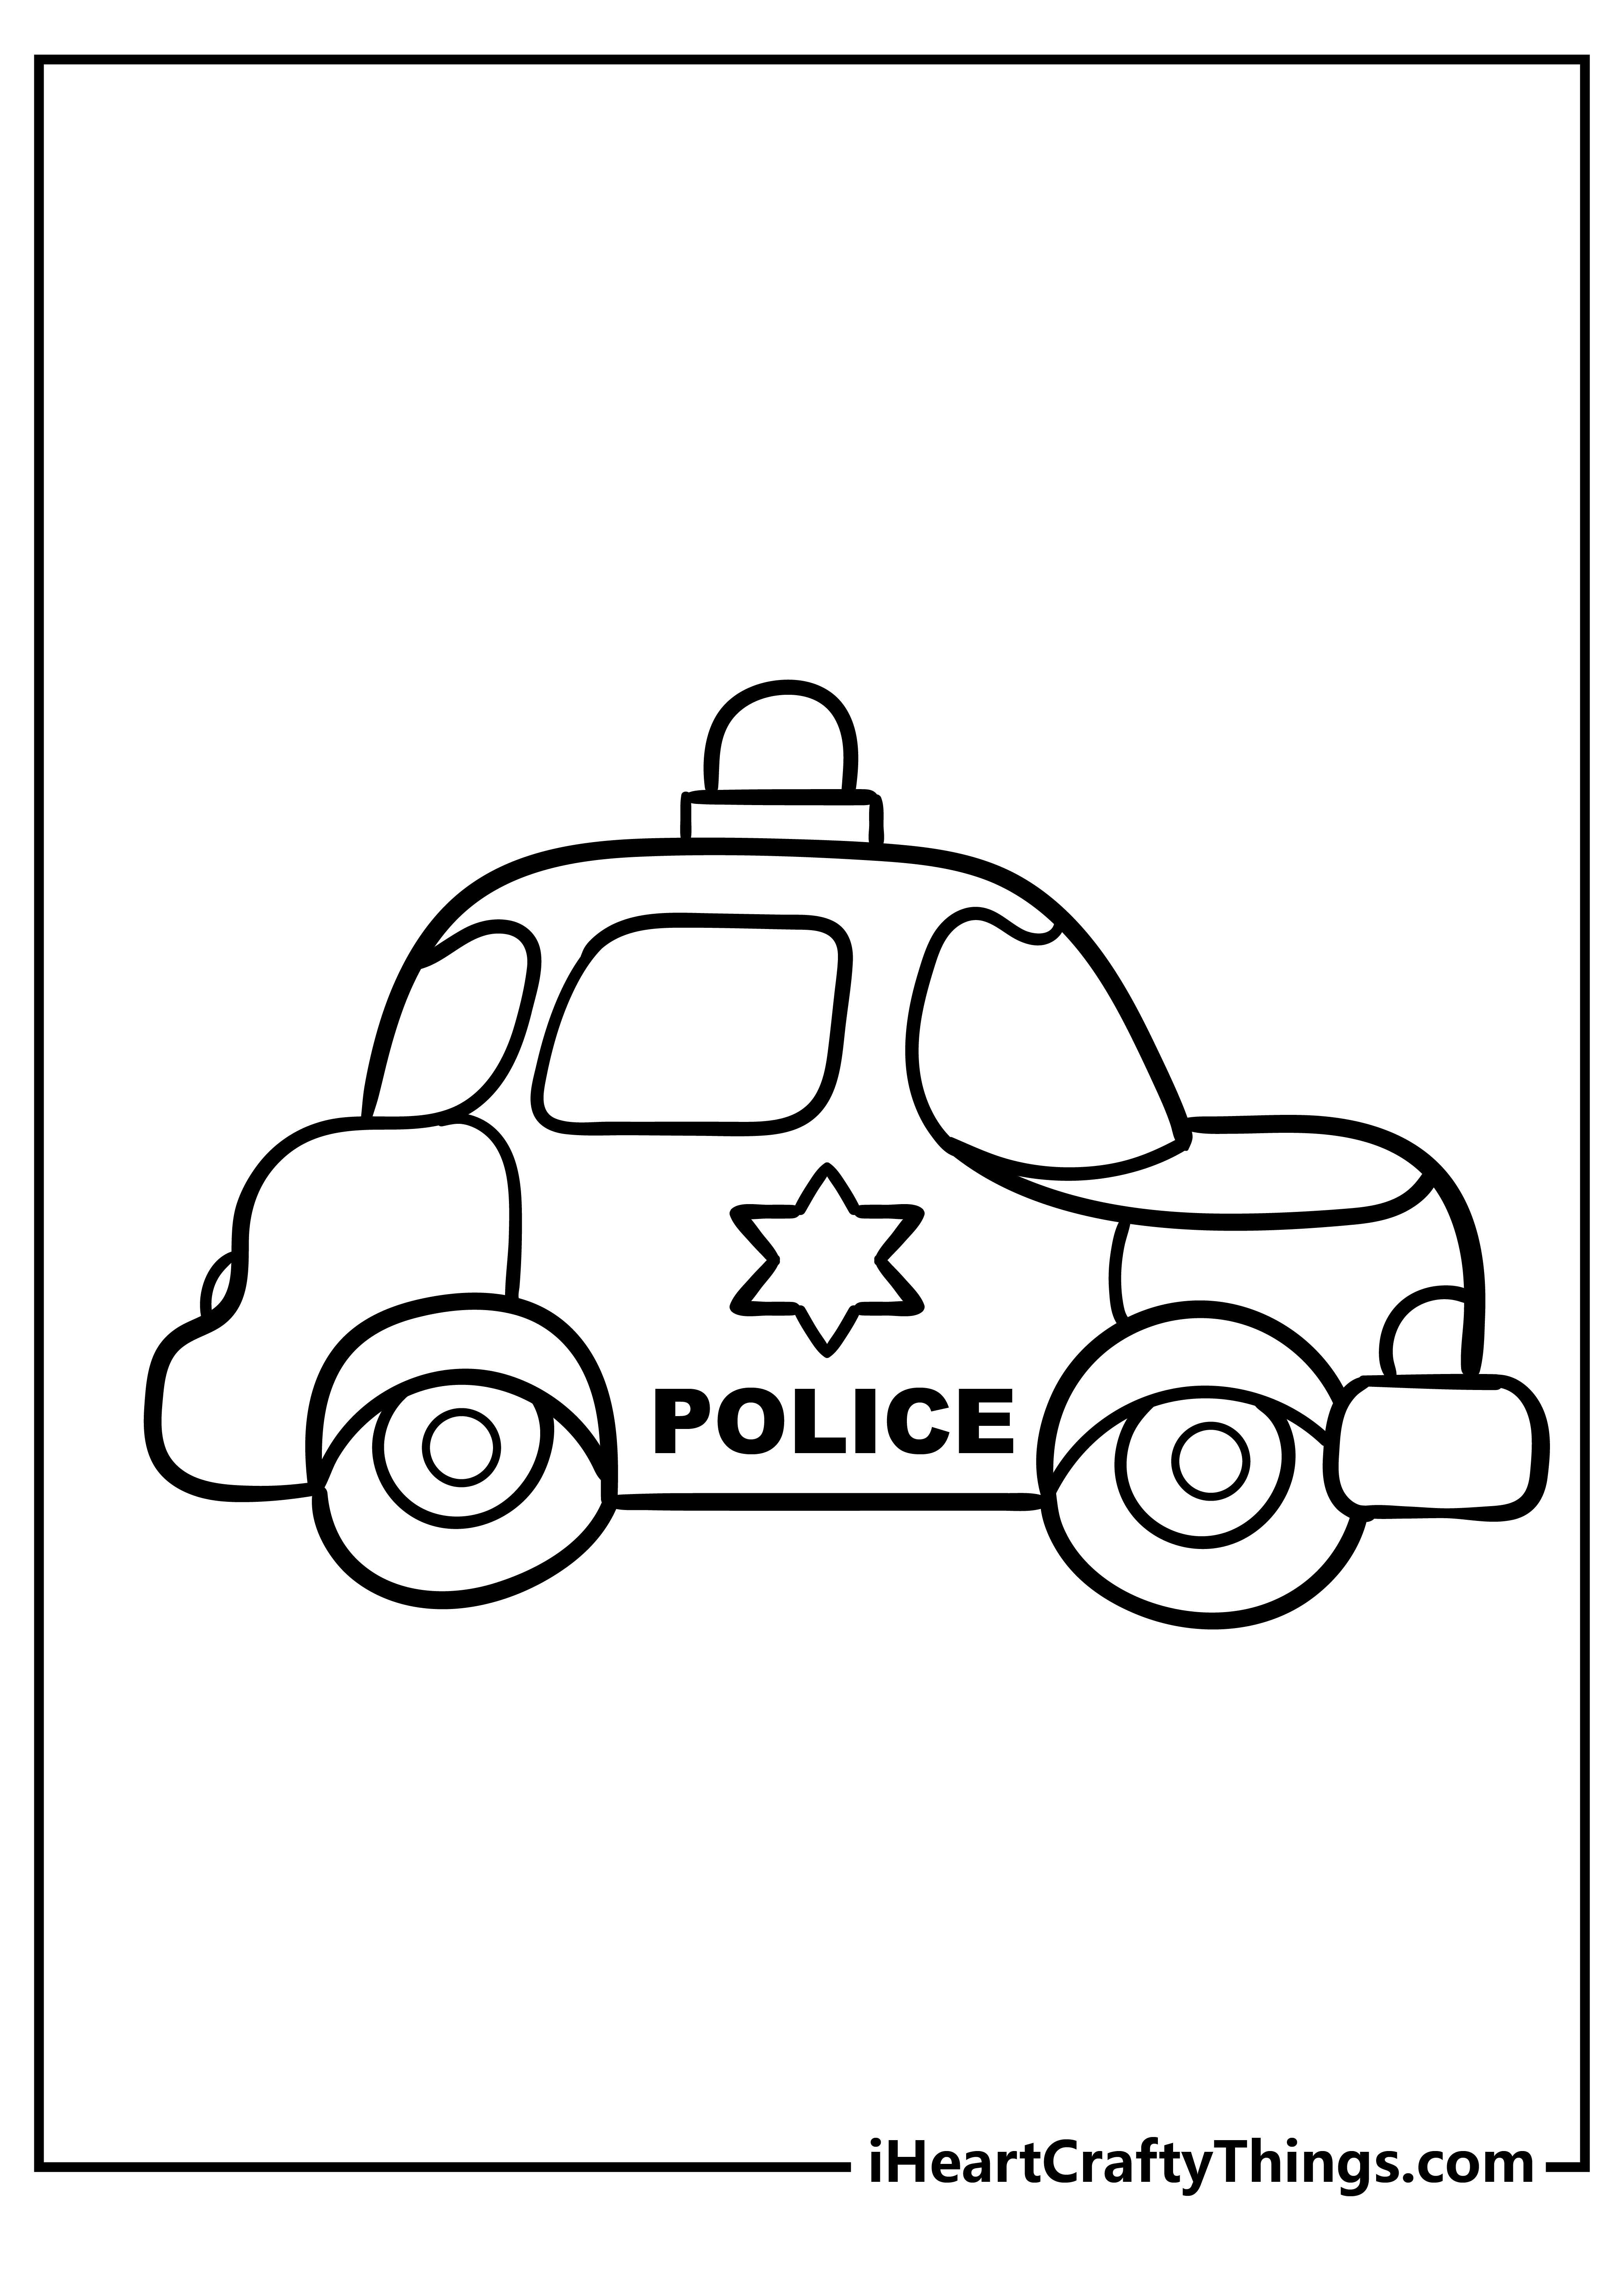 Police Car Coloring Pages for adults free printable